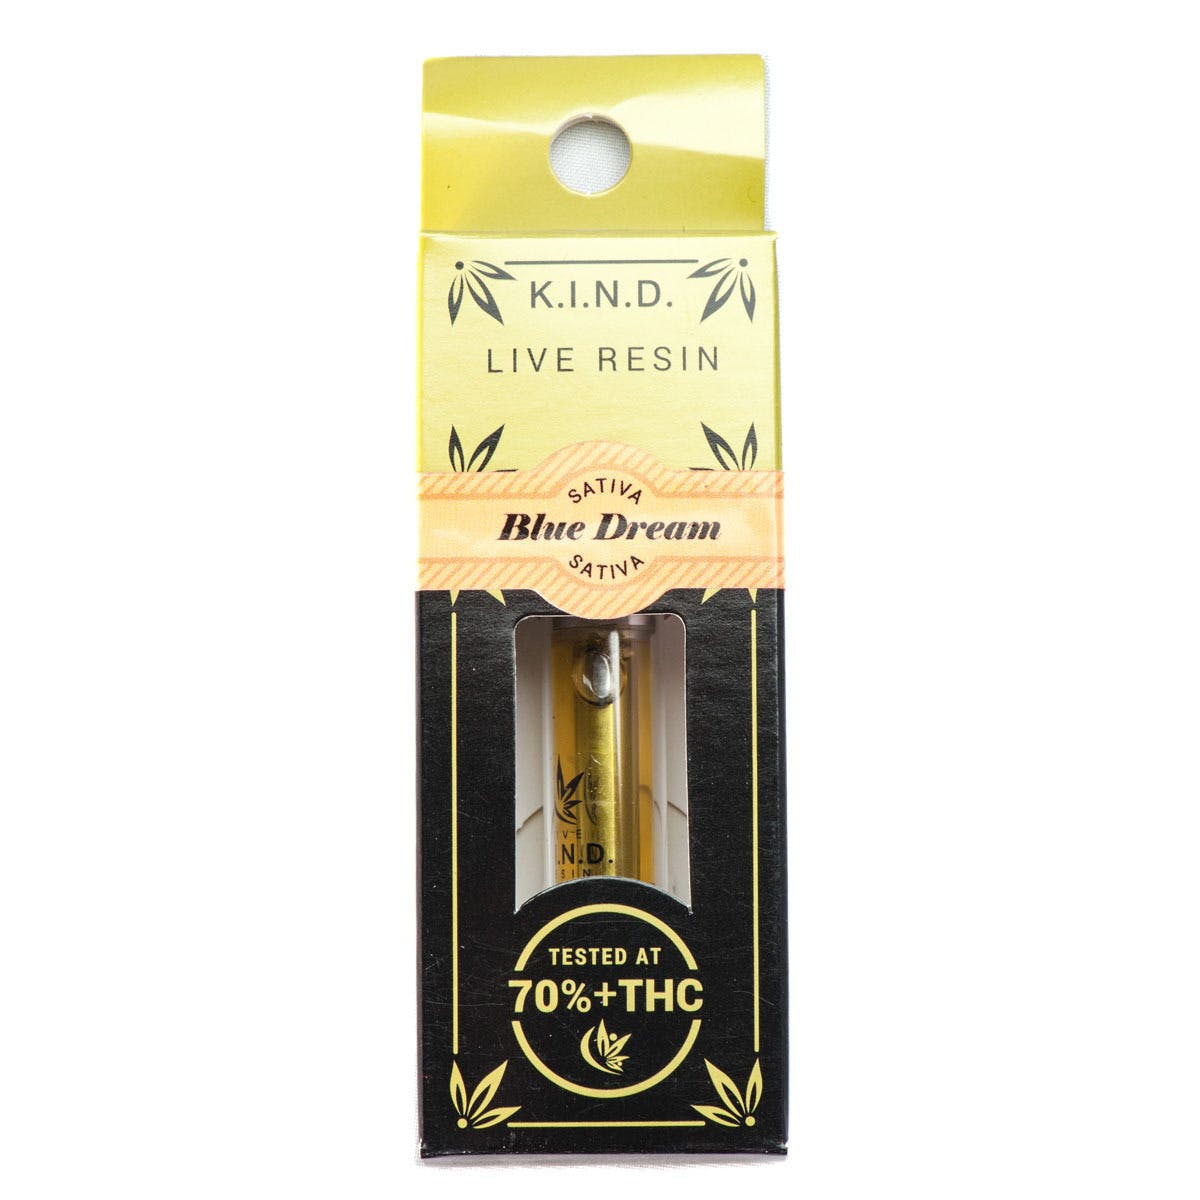 concentrate-k-i-n-d-concentrates-blue-dream-sativa-live-resin-cartridge-1000mg